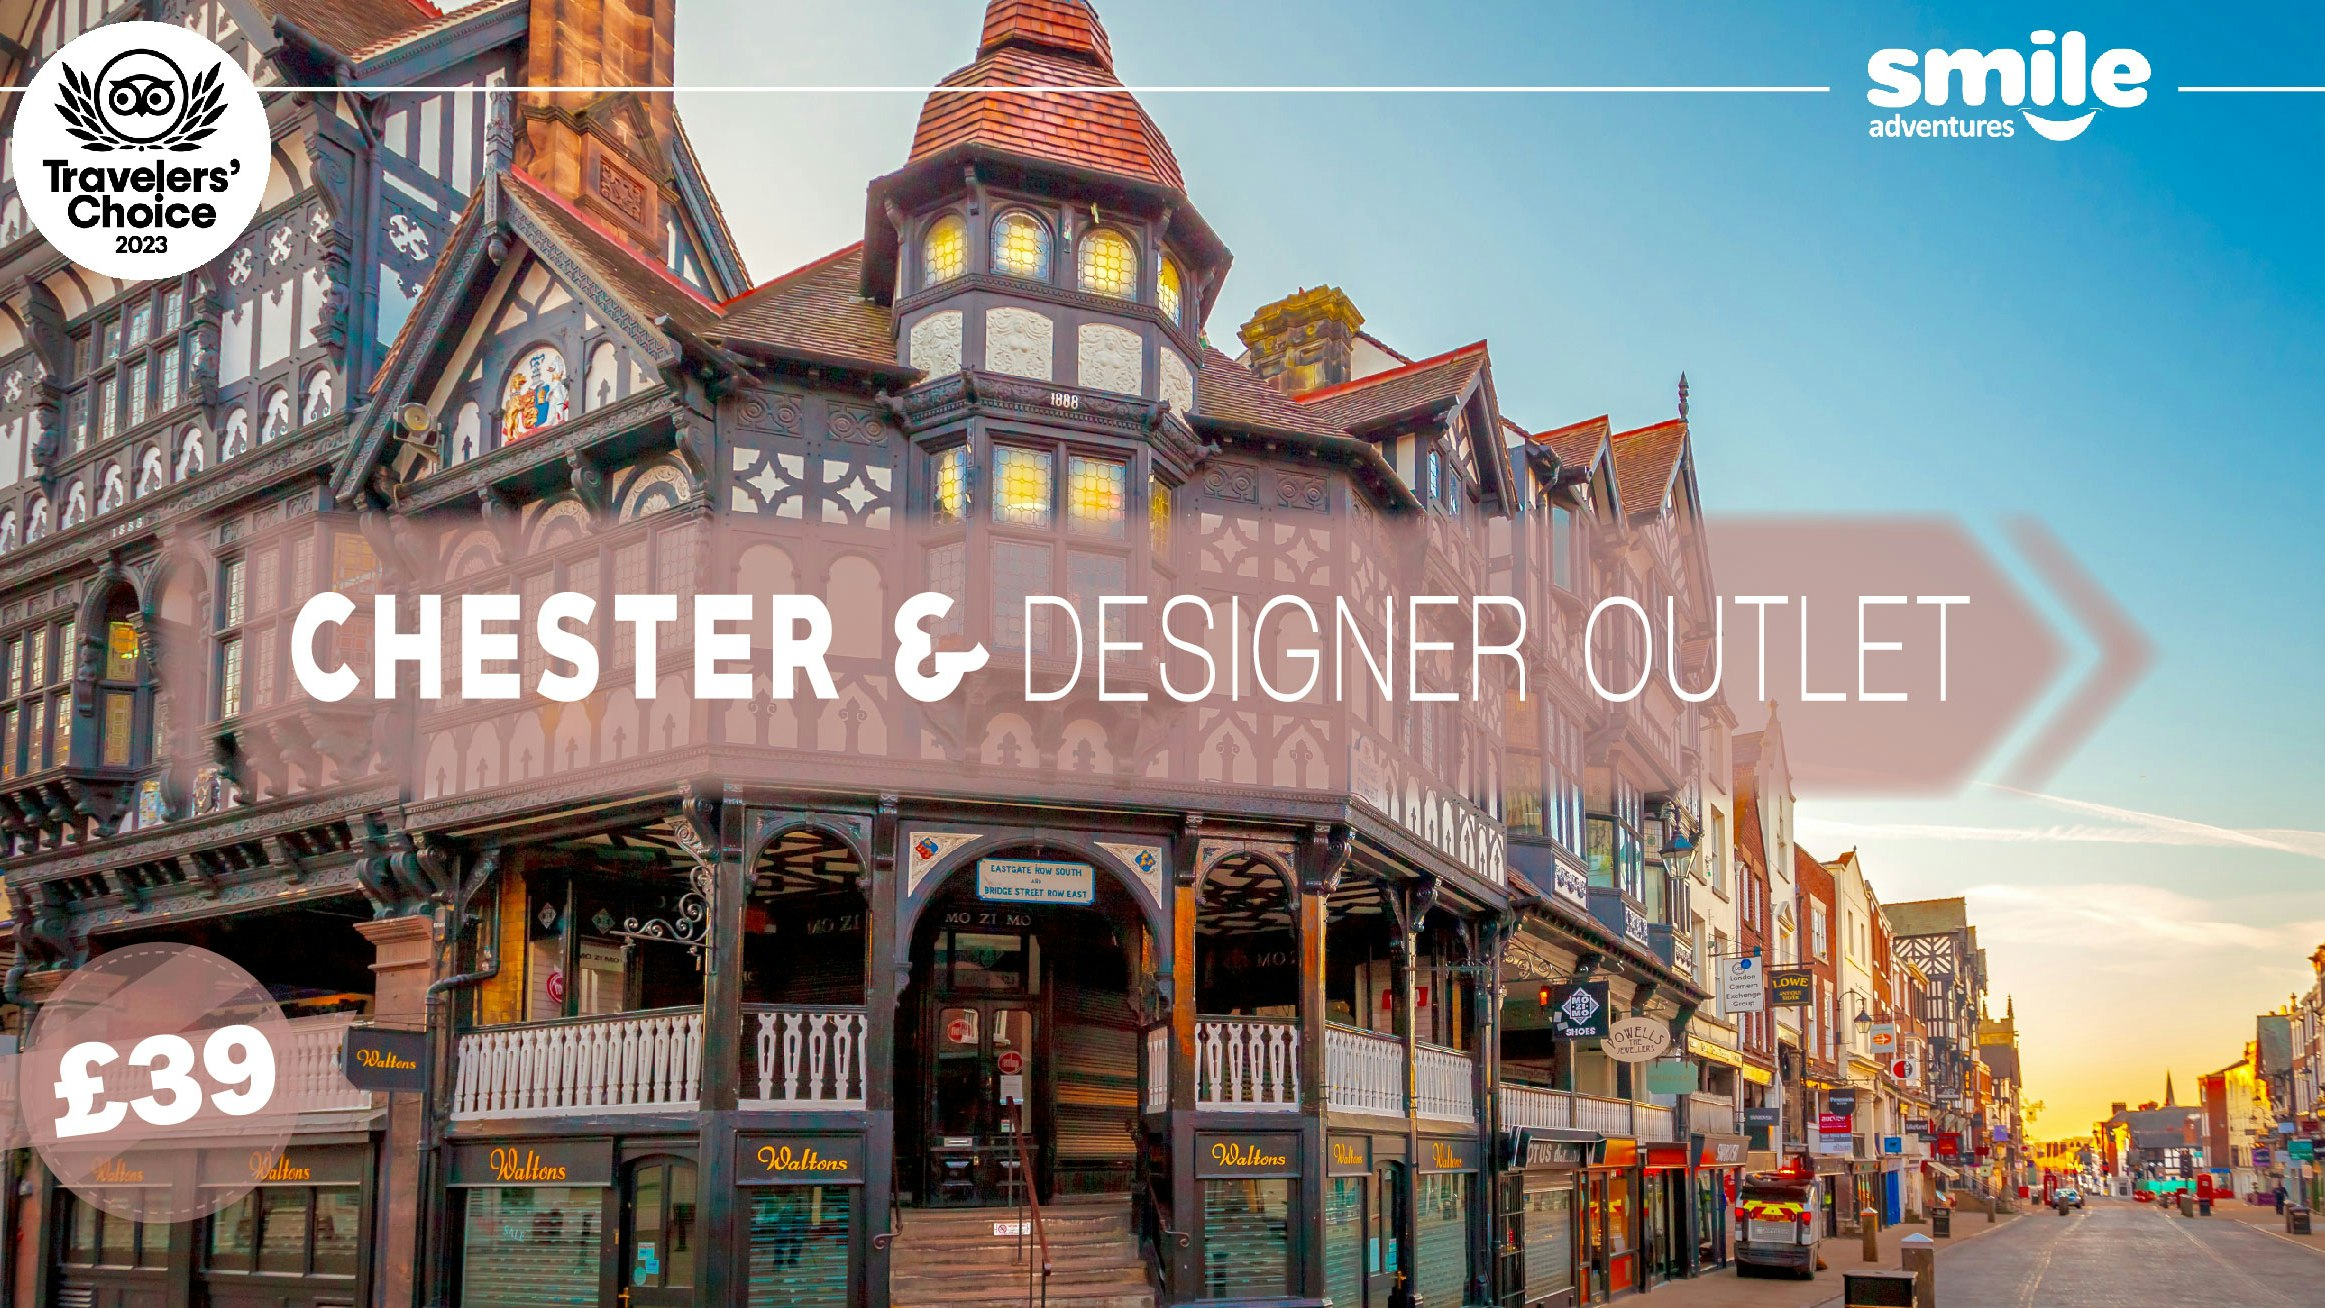 Chester & Designer Outlet – From Manchester